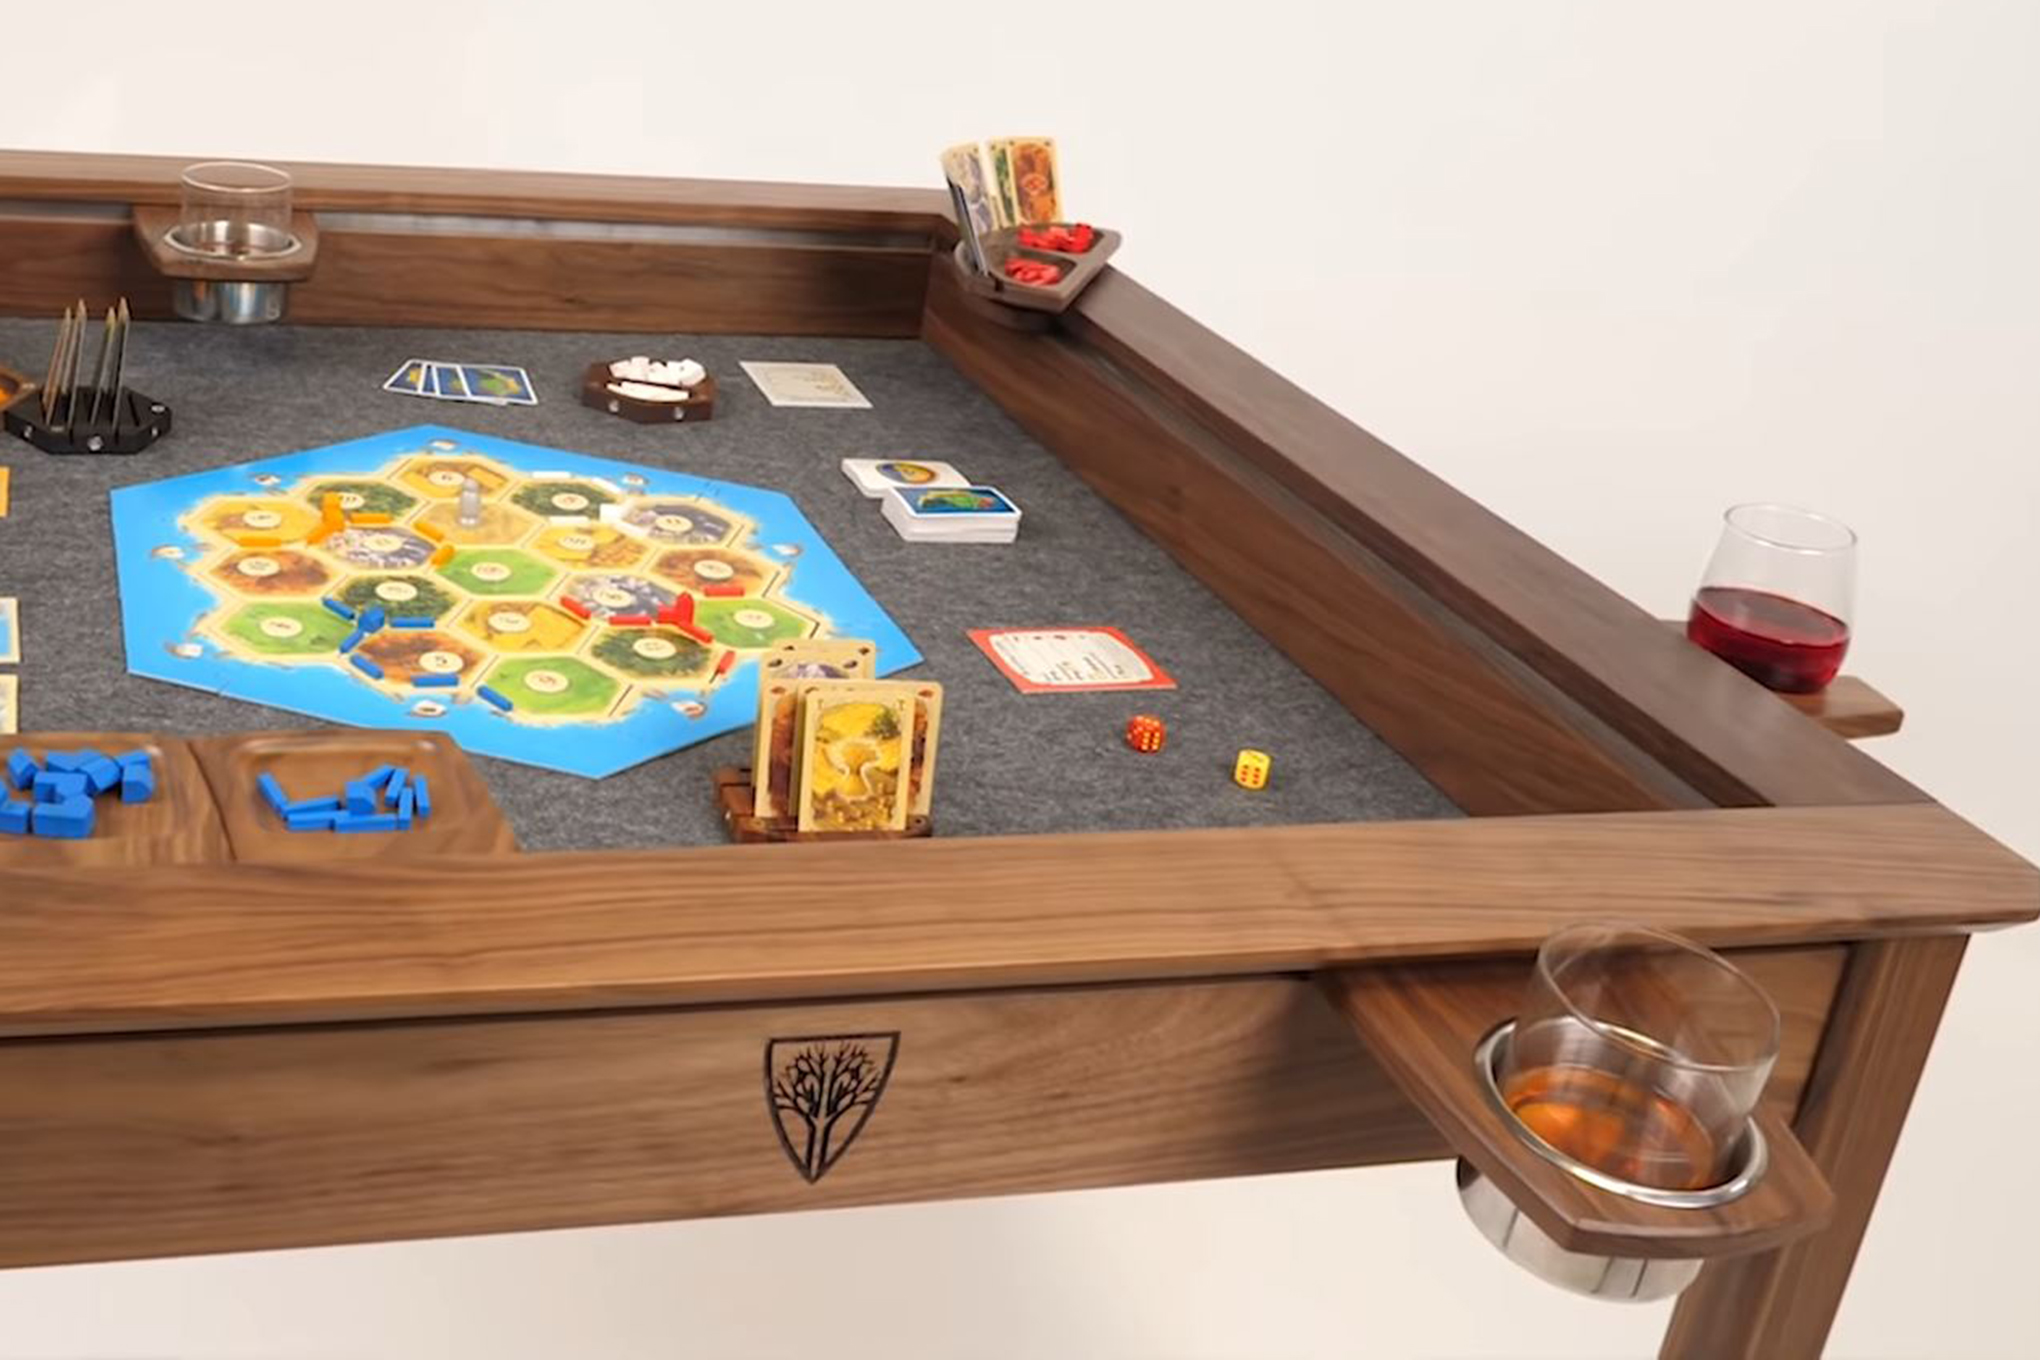 A Wyrmwood Modular Gaming Table, showing multiple accessories including cup holders and card holders.